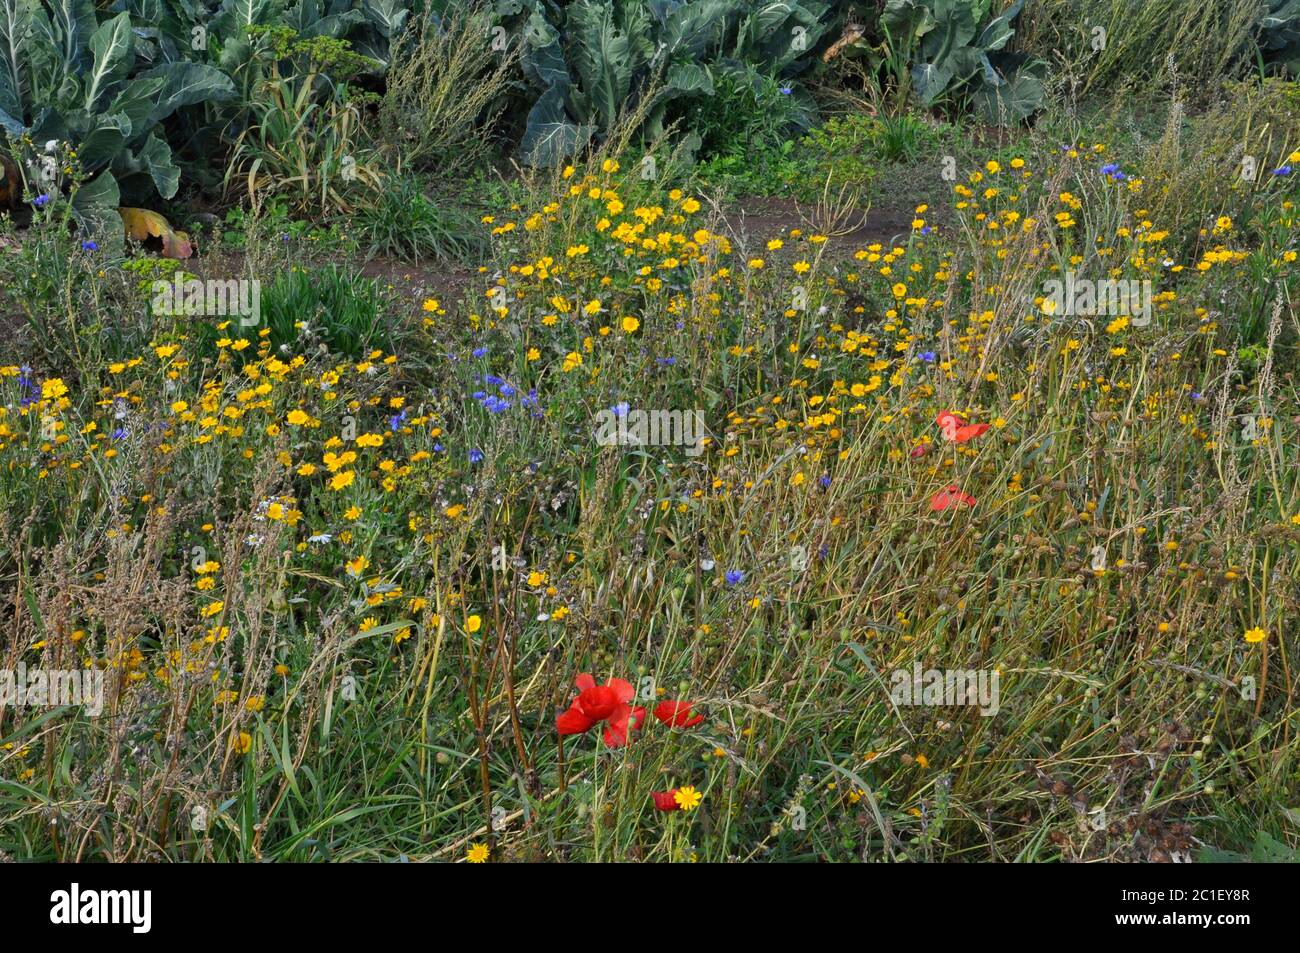 Wild flowers growing around the margin of a field of cauliflower.Poppies,Corn Marigold,Cornflower, various grasses and weeds.West Penwith, Cornwall.UK Stock Photo